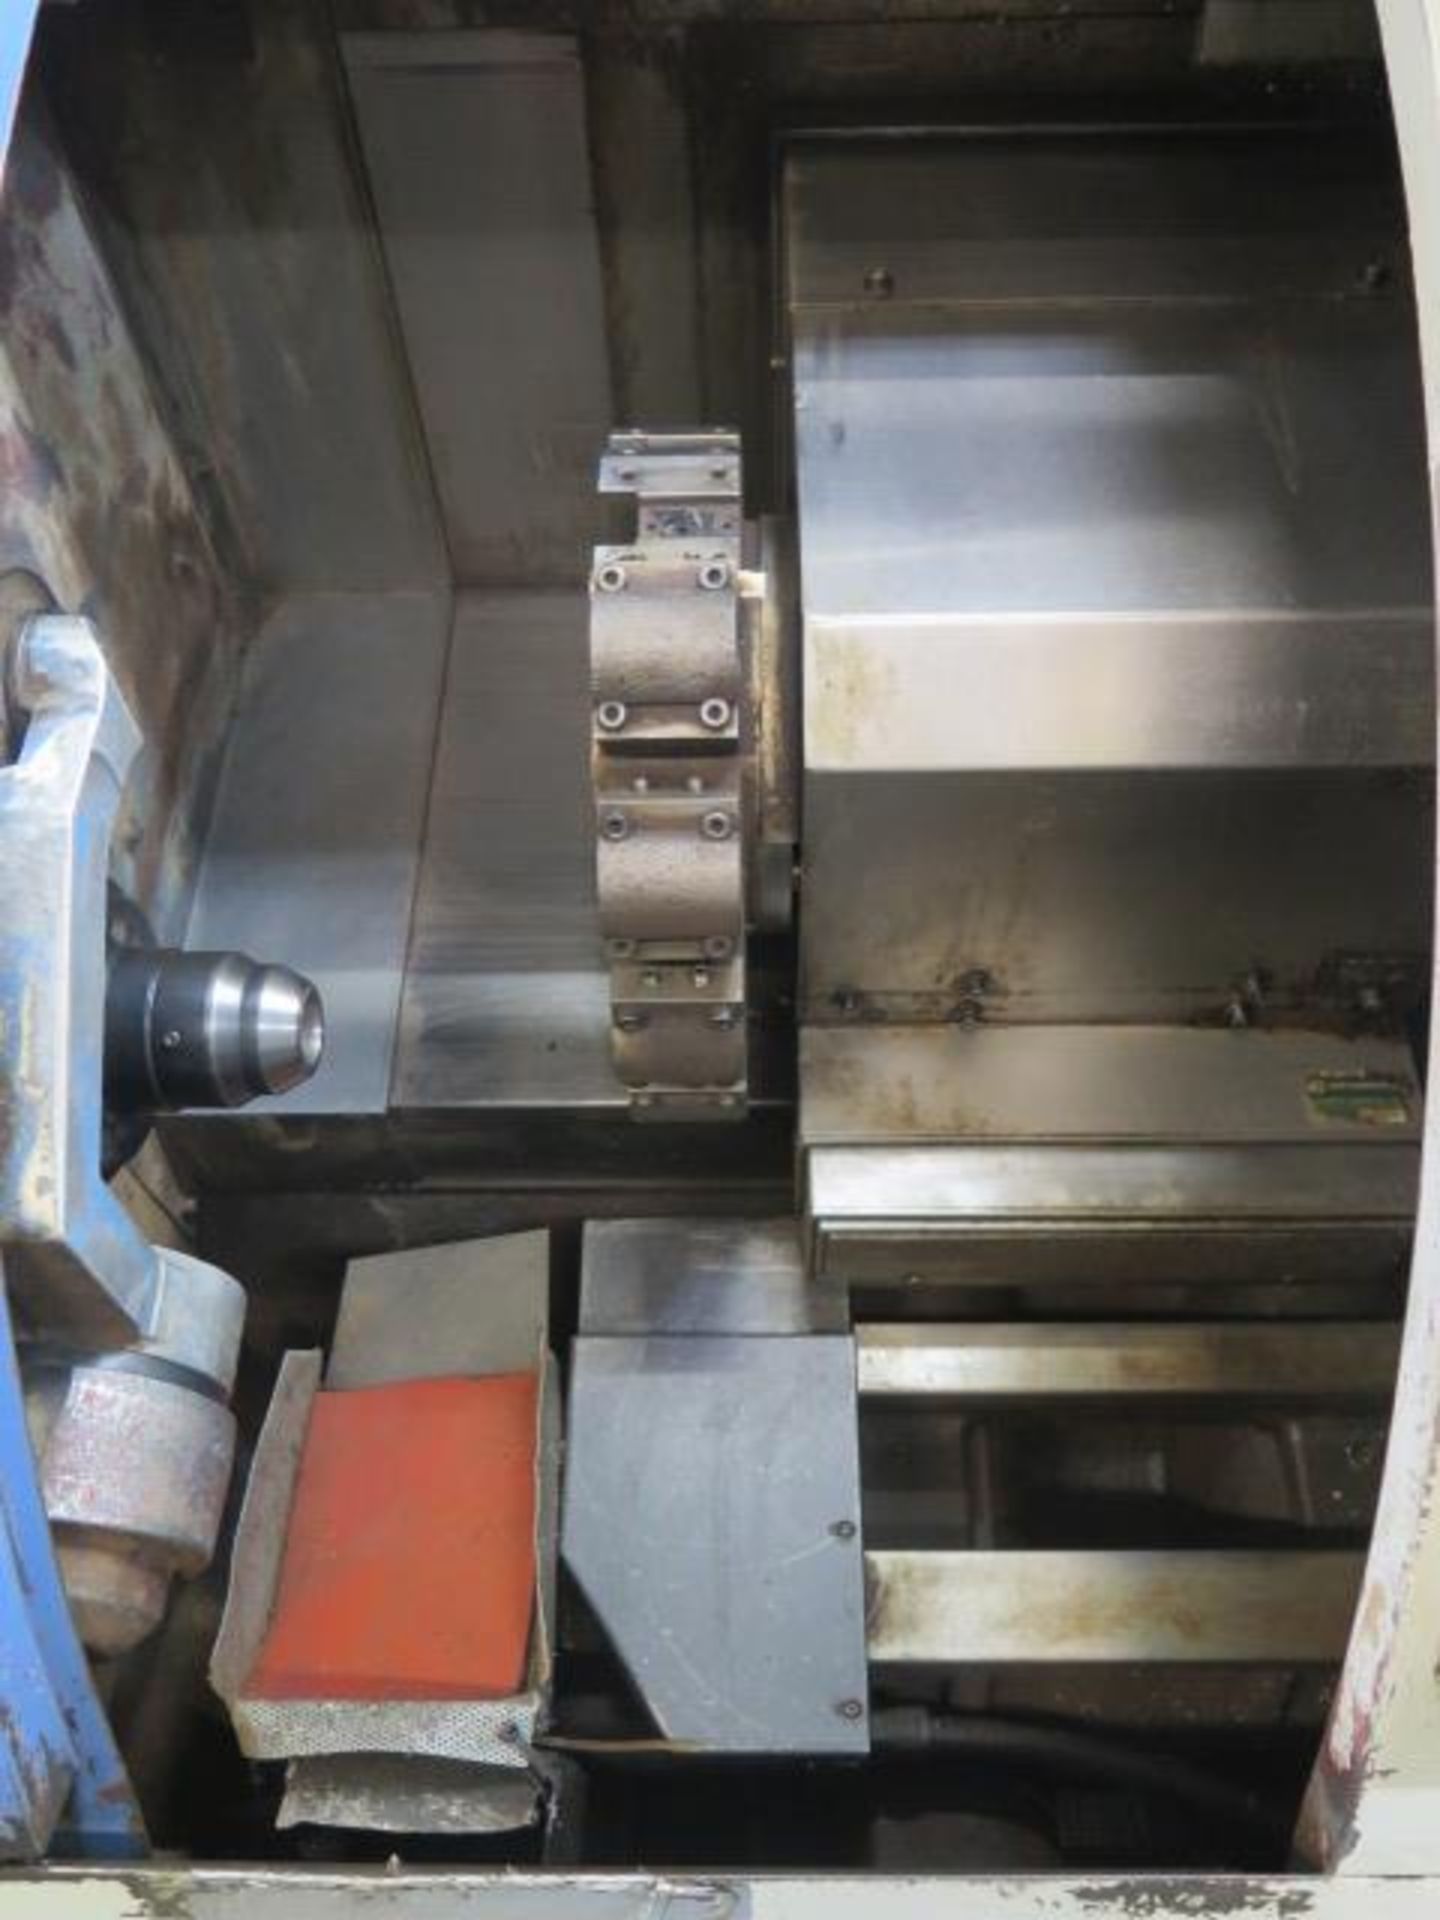 Leadwell T6 CNC Turning Center s/n L2TJJ0823 w/Fanuc Series 0-T Controls, Tool Presetter, SOLD AS IS - Image 4 of 12